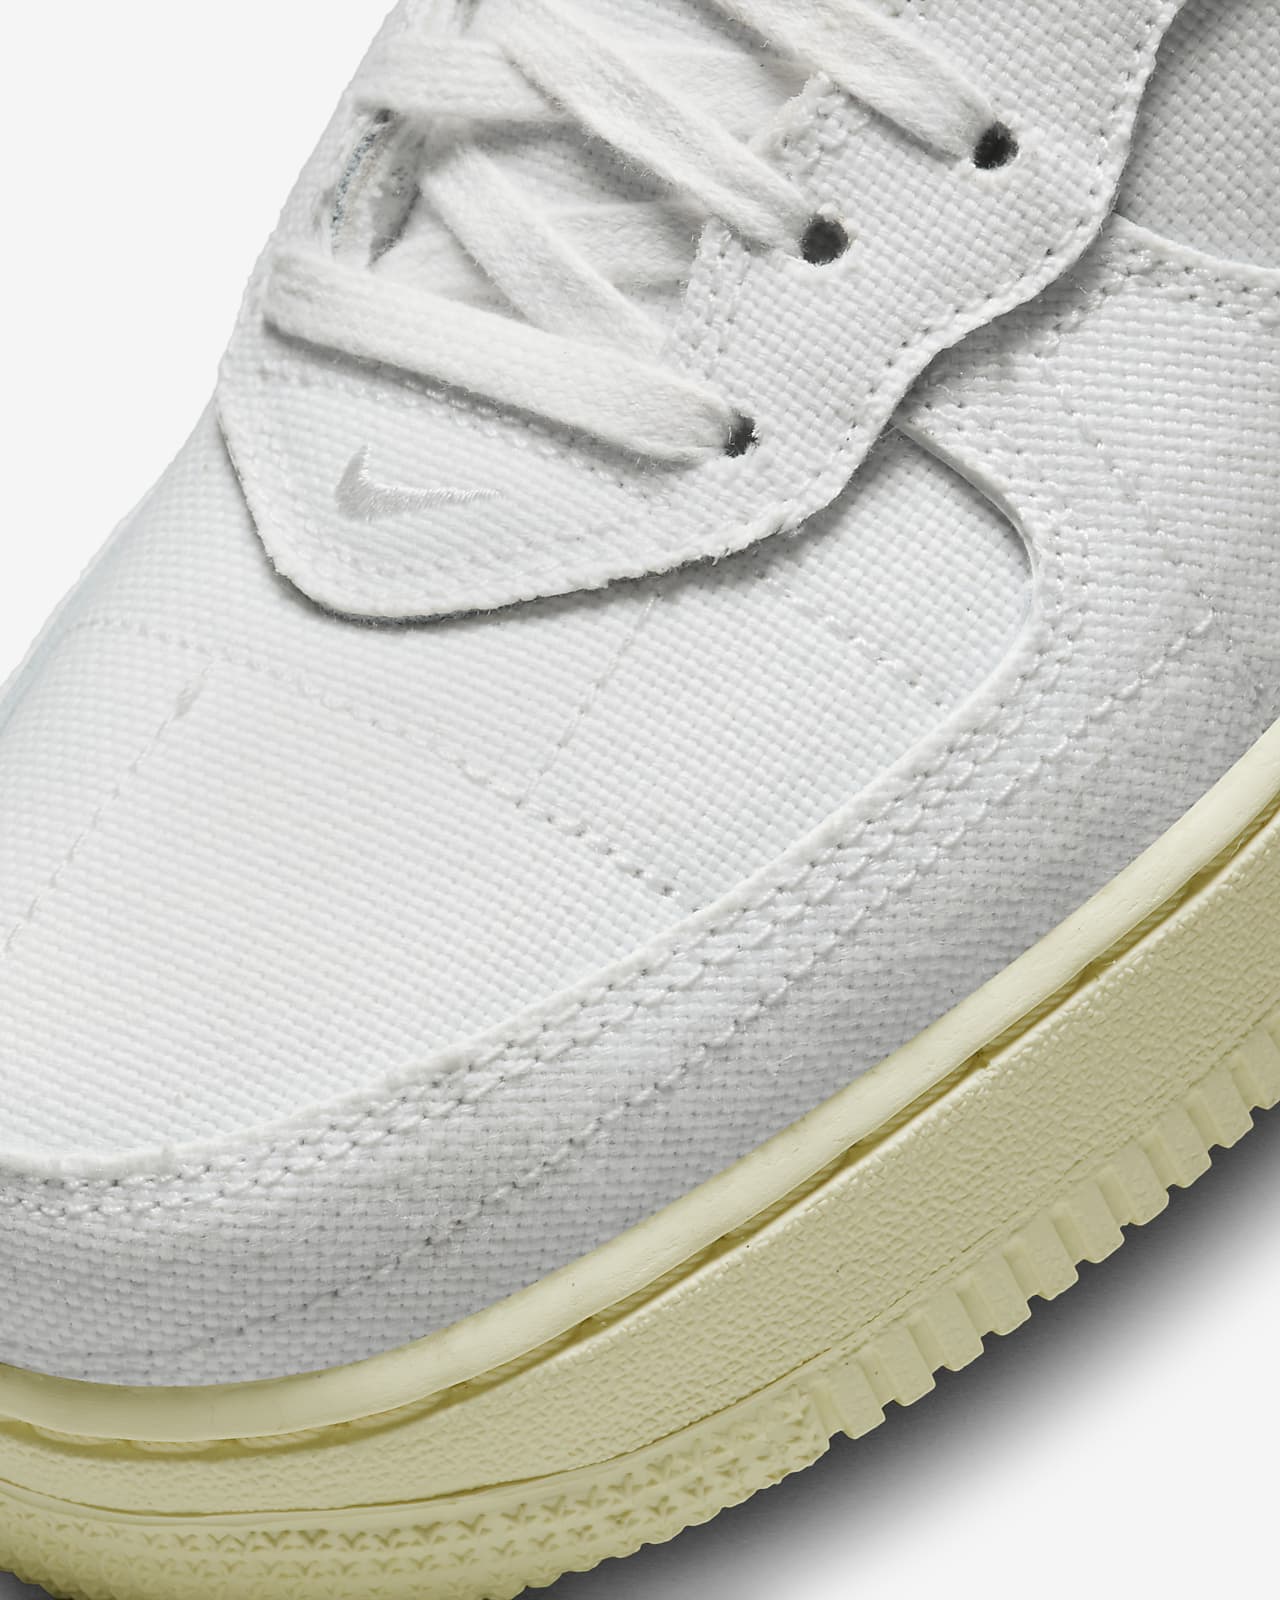 Nike Air Force 1 '07 LV8 Women's Shoes. Nike IN